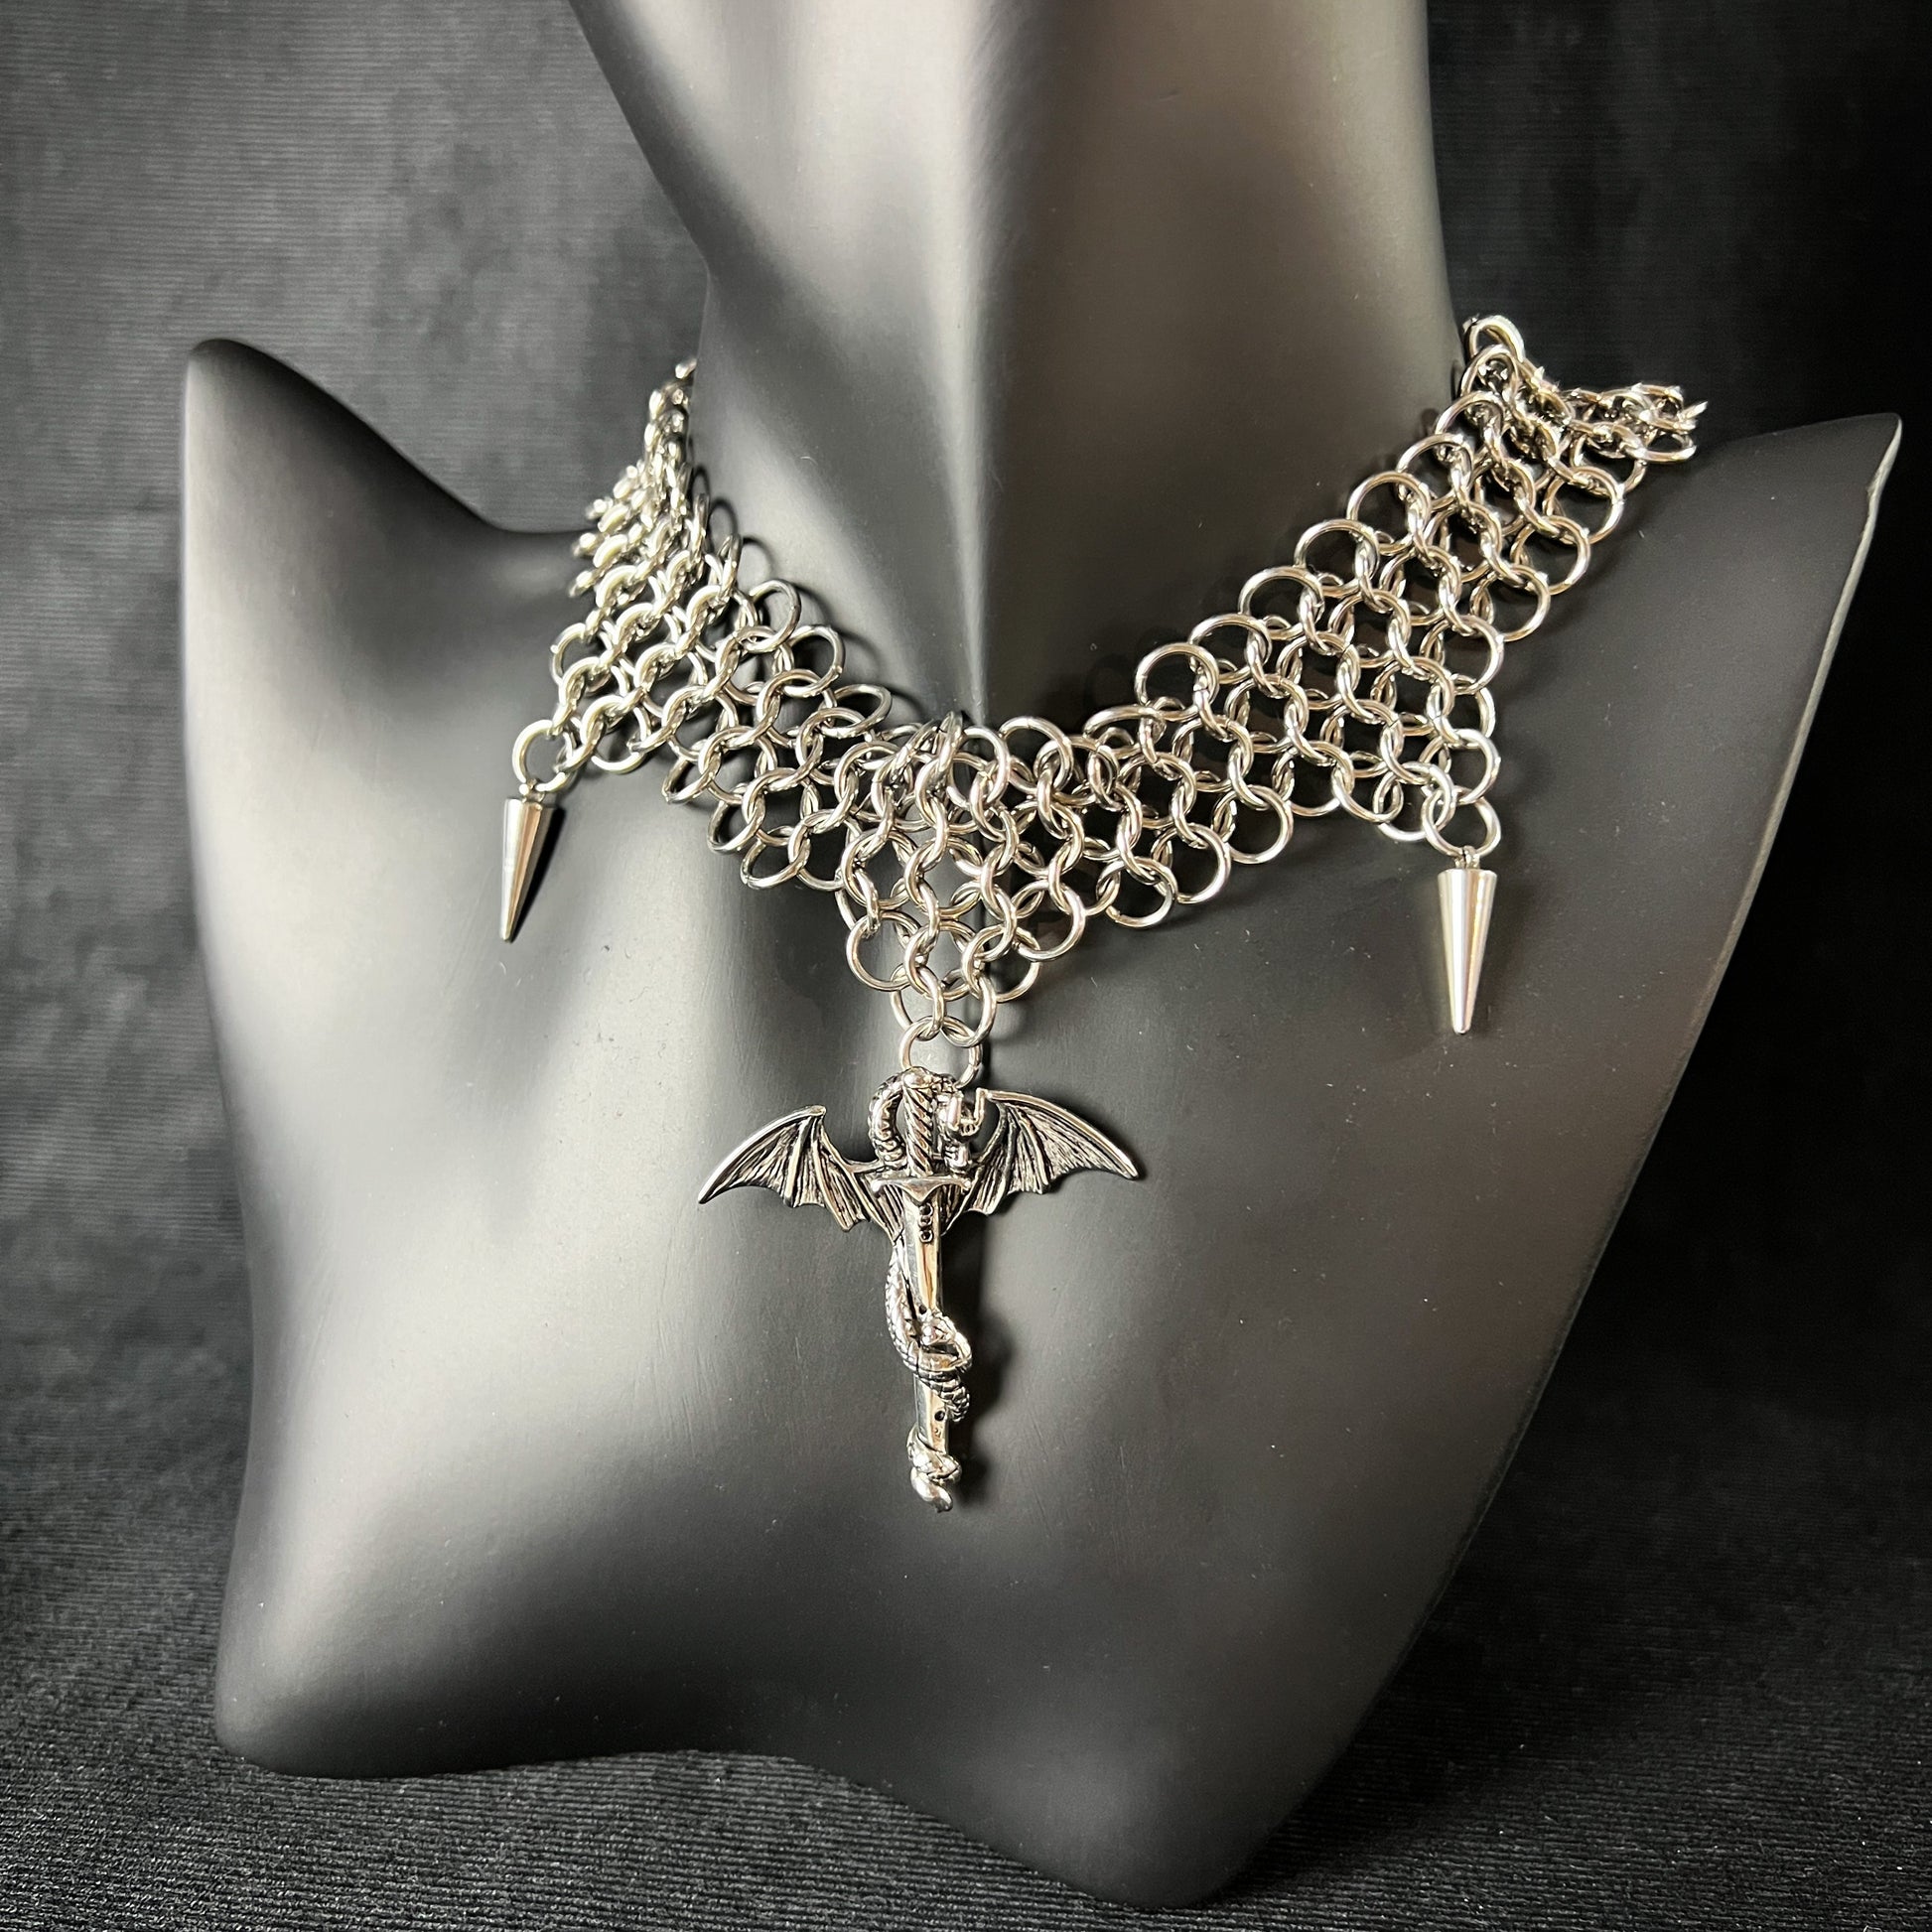 Dragon sword chainmail choker European 4 in 1 medieval fantasy necklace